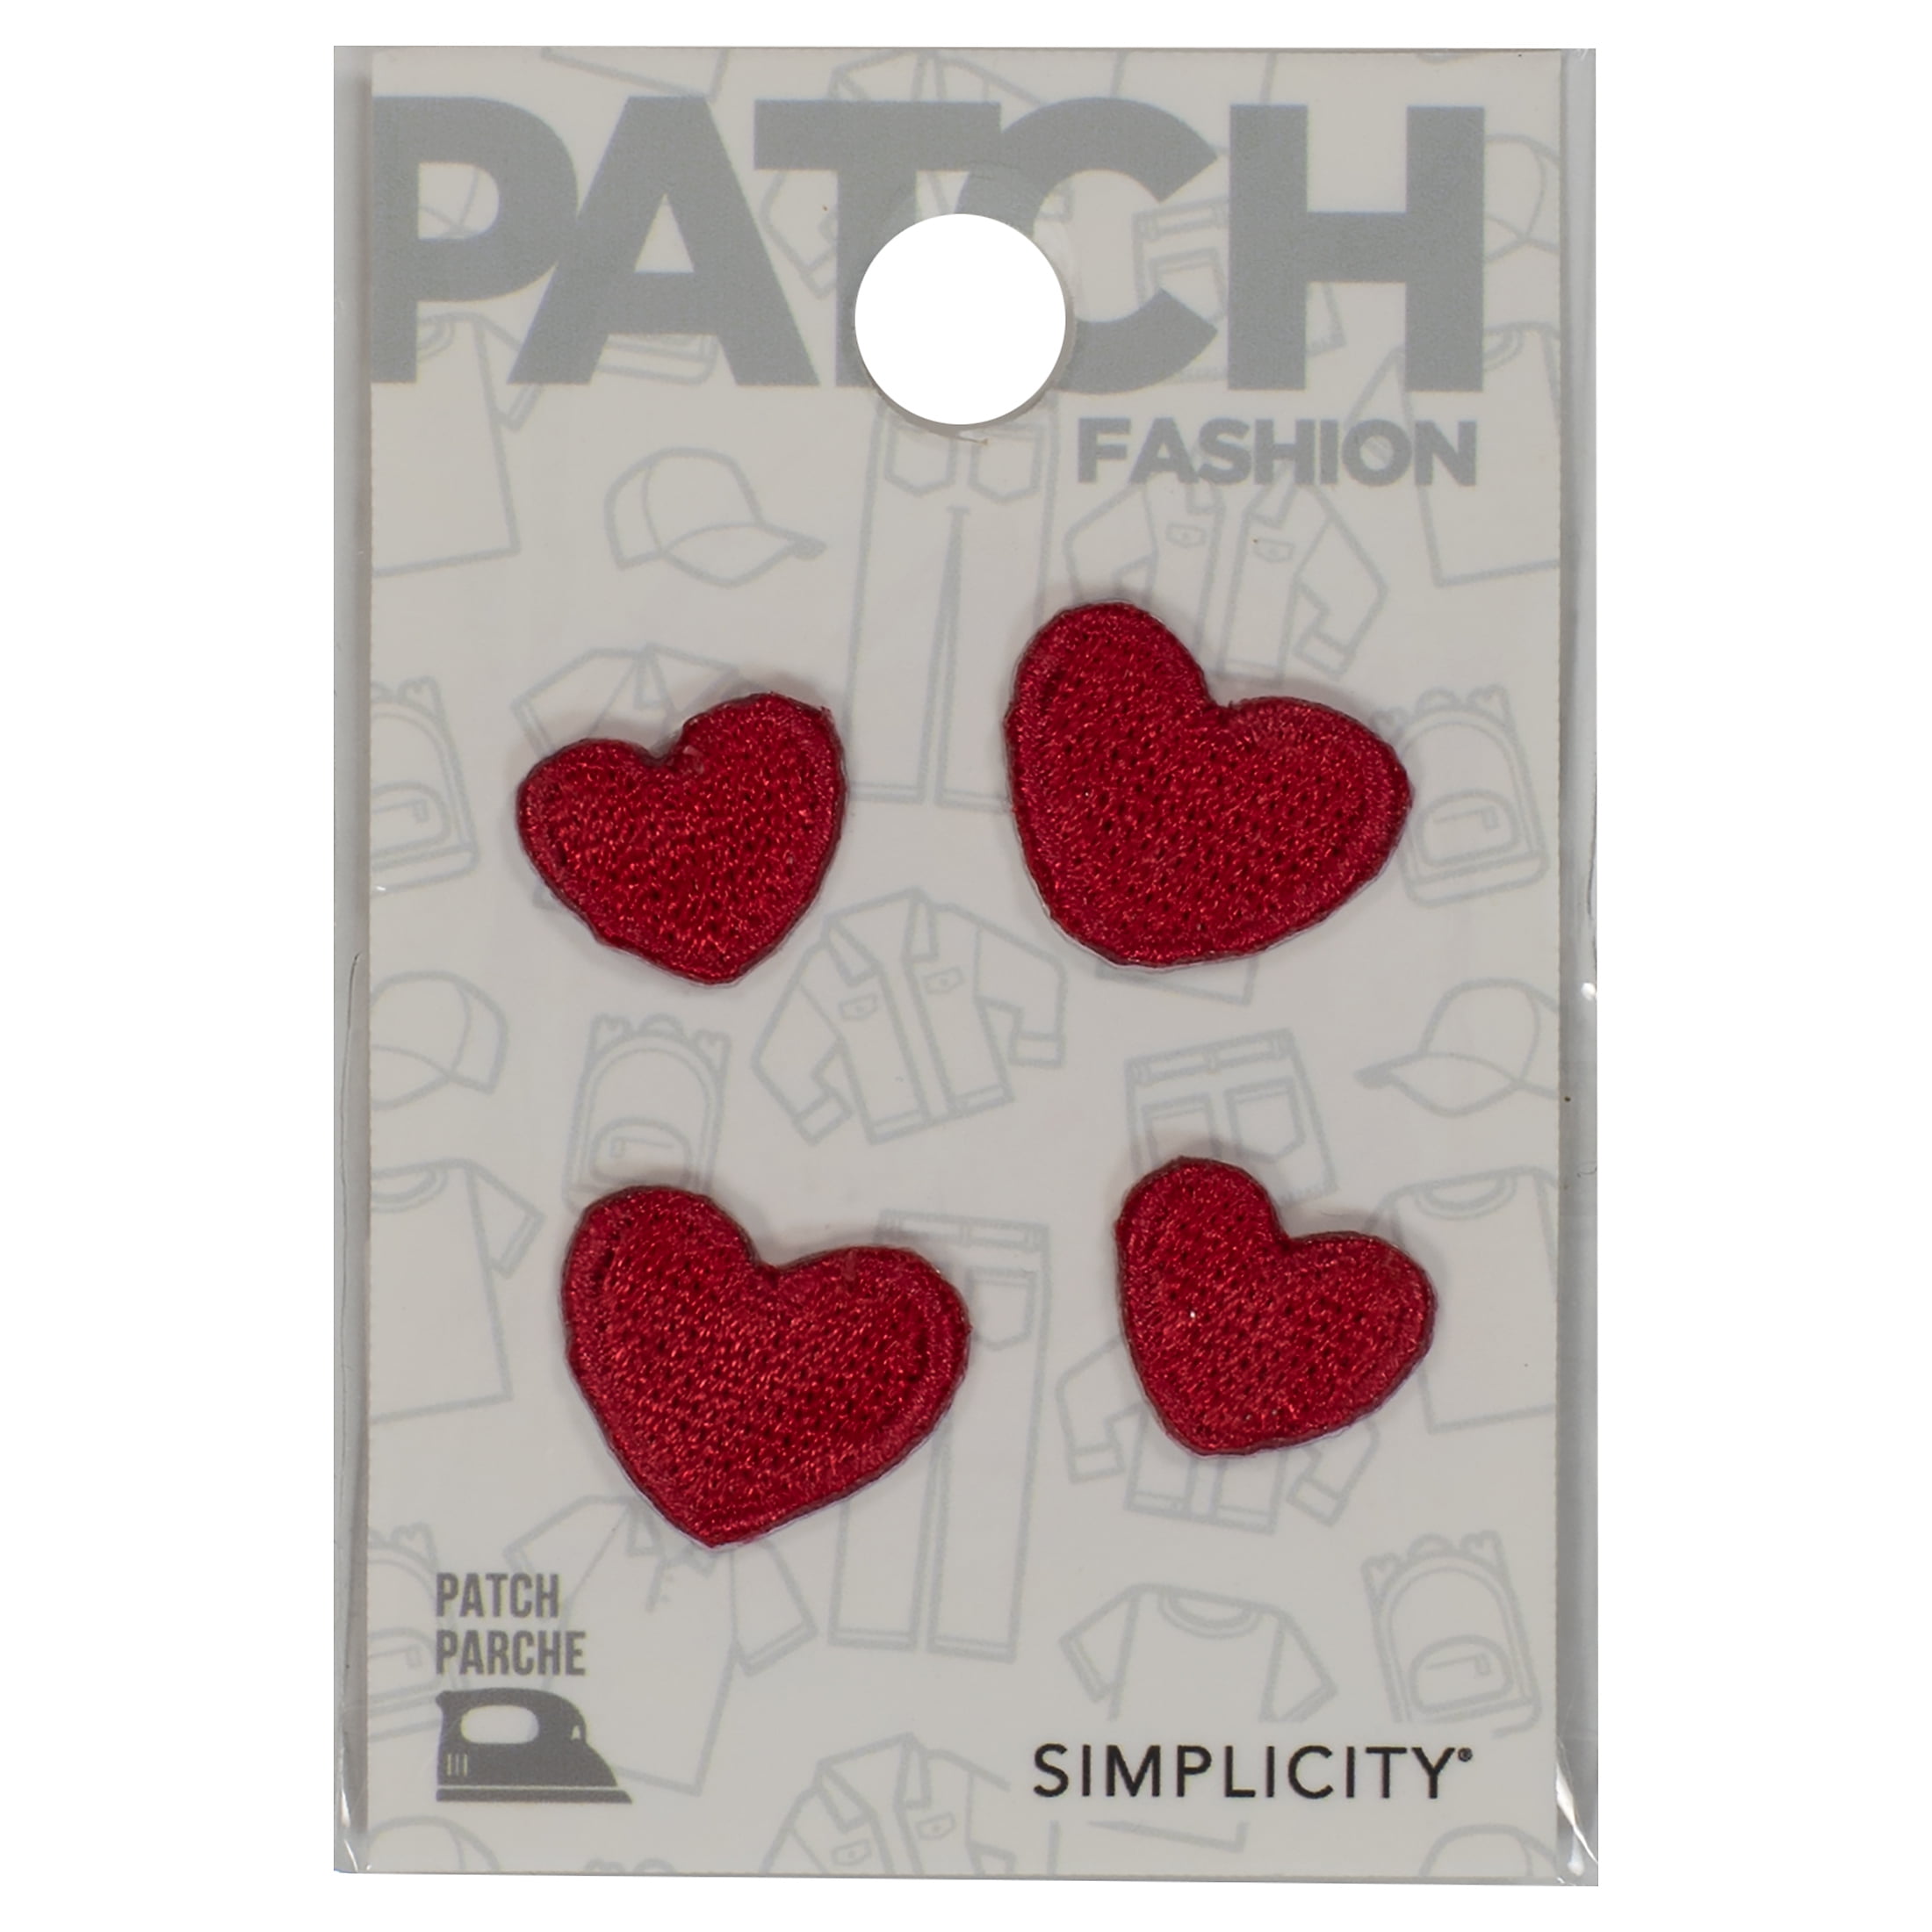  Simplicity 19320100102 Red Heart Iron On Applique Patch for  Clothes, Backpacks, and Accessories, Sizes Vary, 4pcs